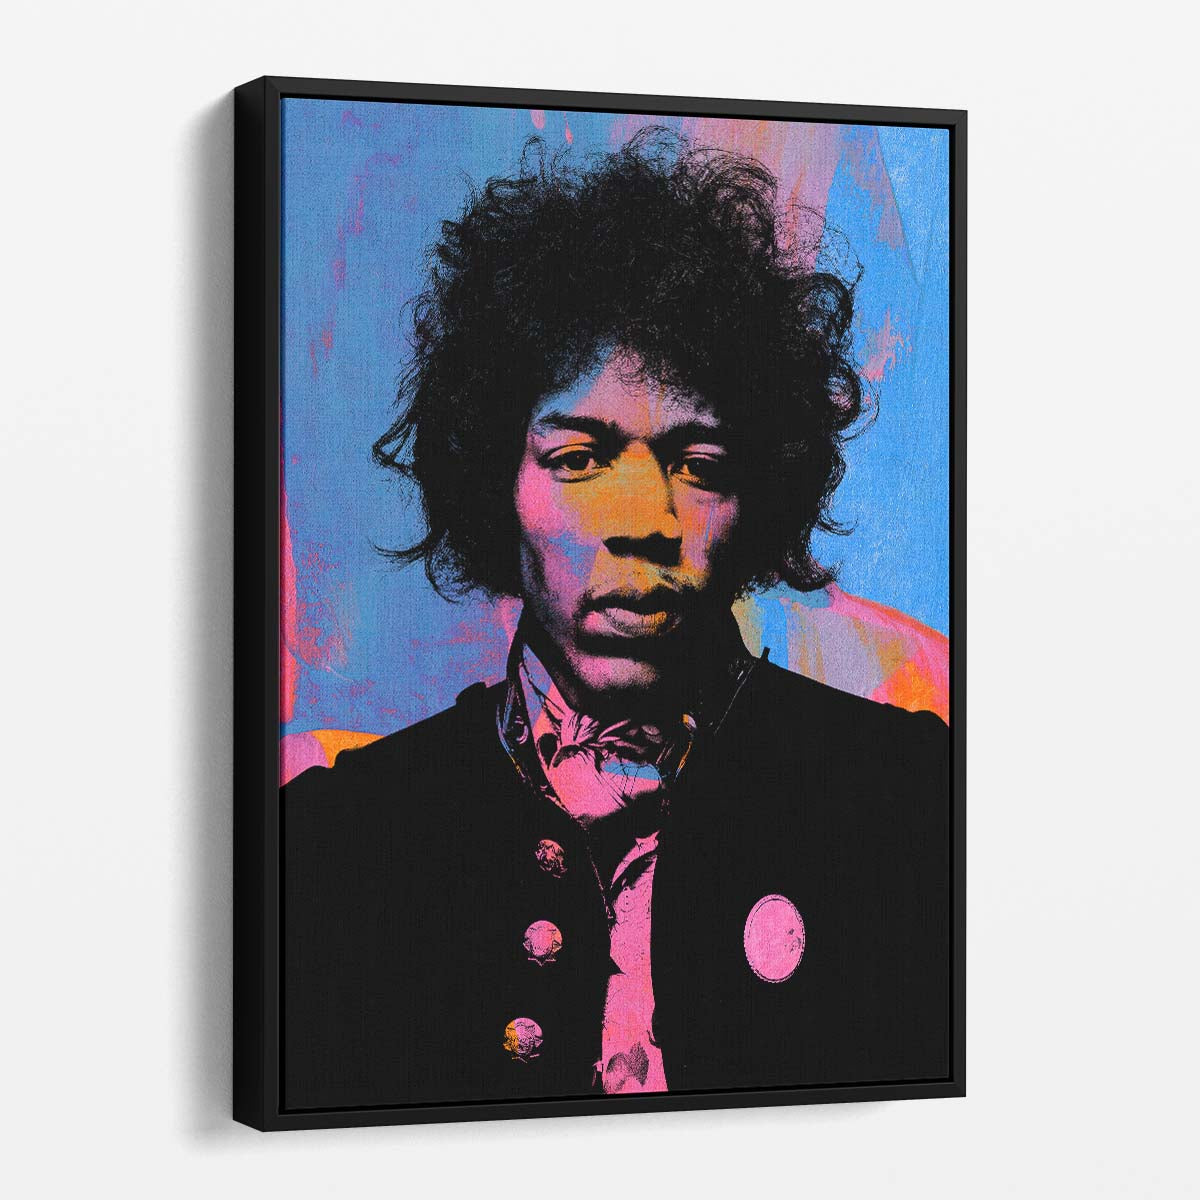 Jimi Hendrix Bright Colors Wall Art by Luxuriance Designs. Made in USA.